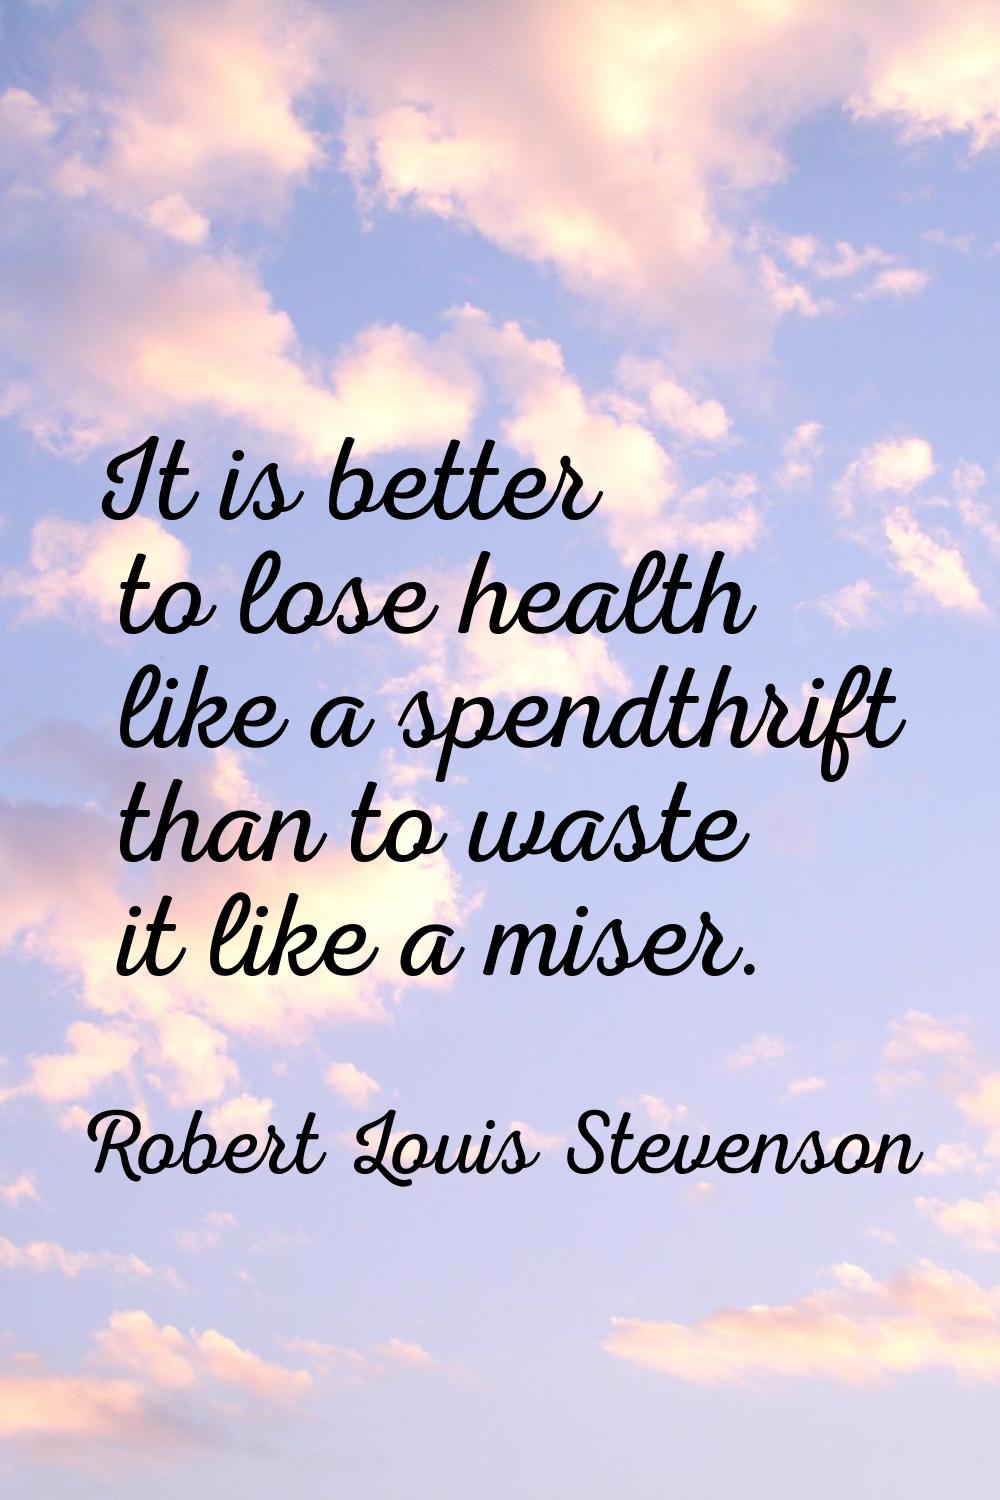 It is better to lose health like a spendthrift than to waste it like a miser.